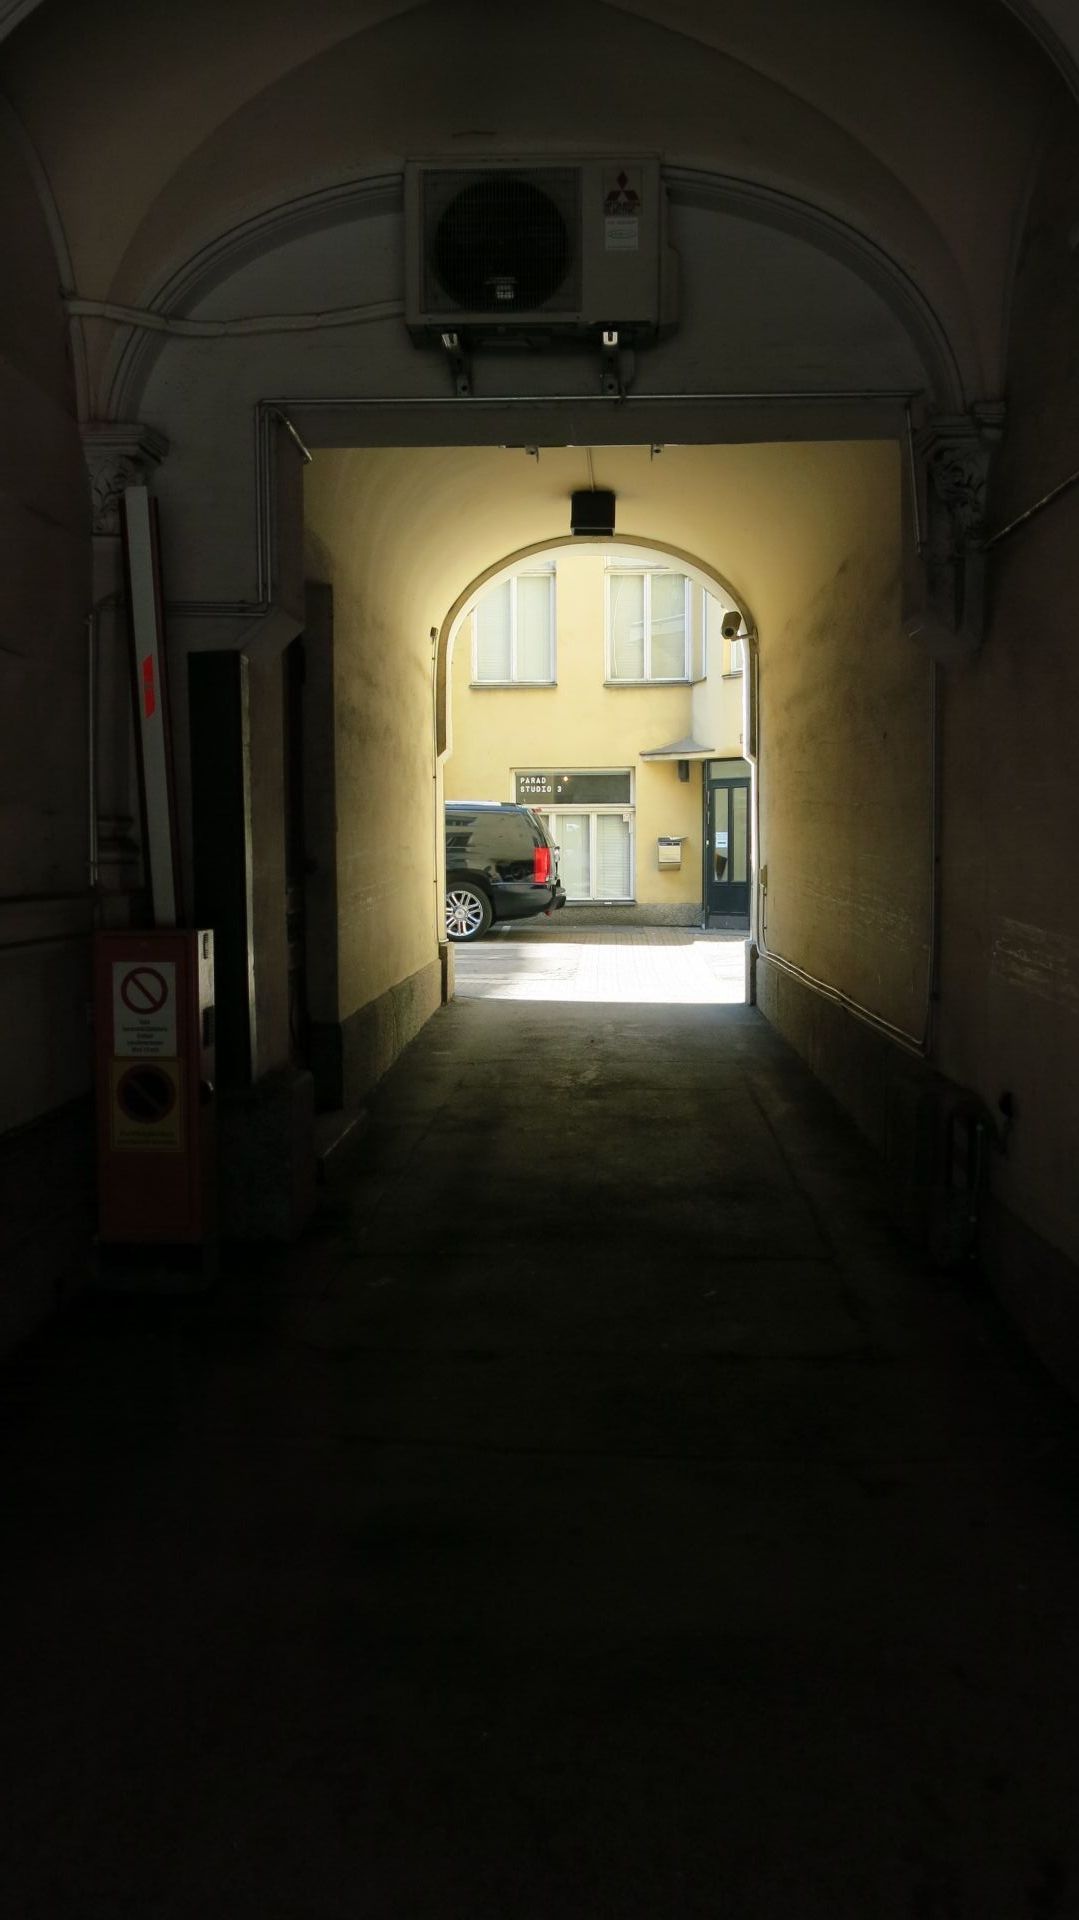 Through the gate, you can access the courtyard.